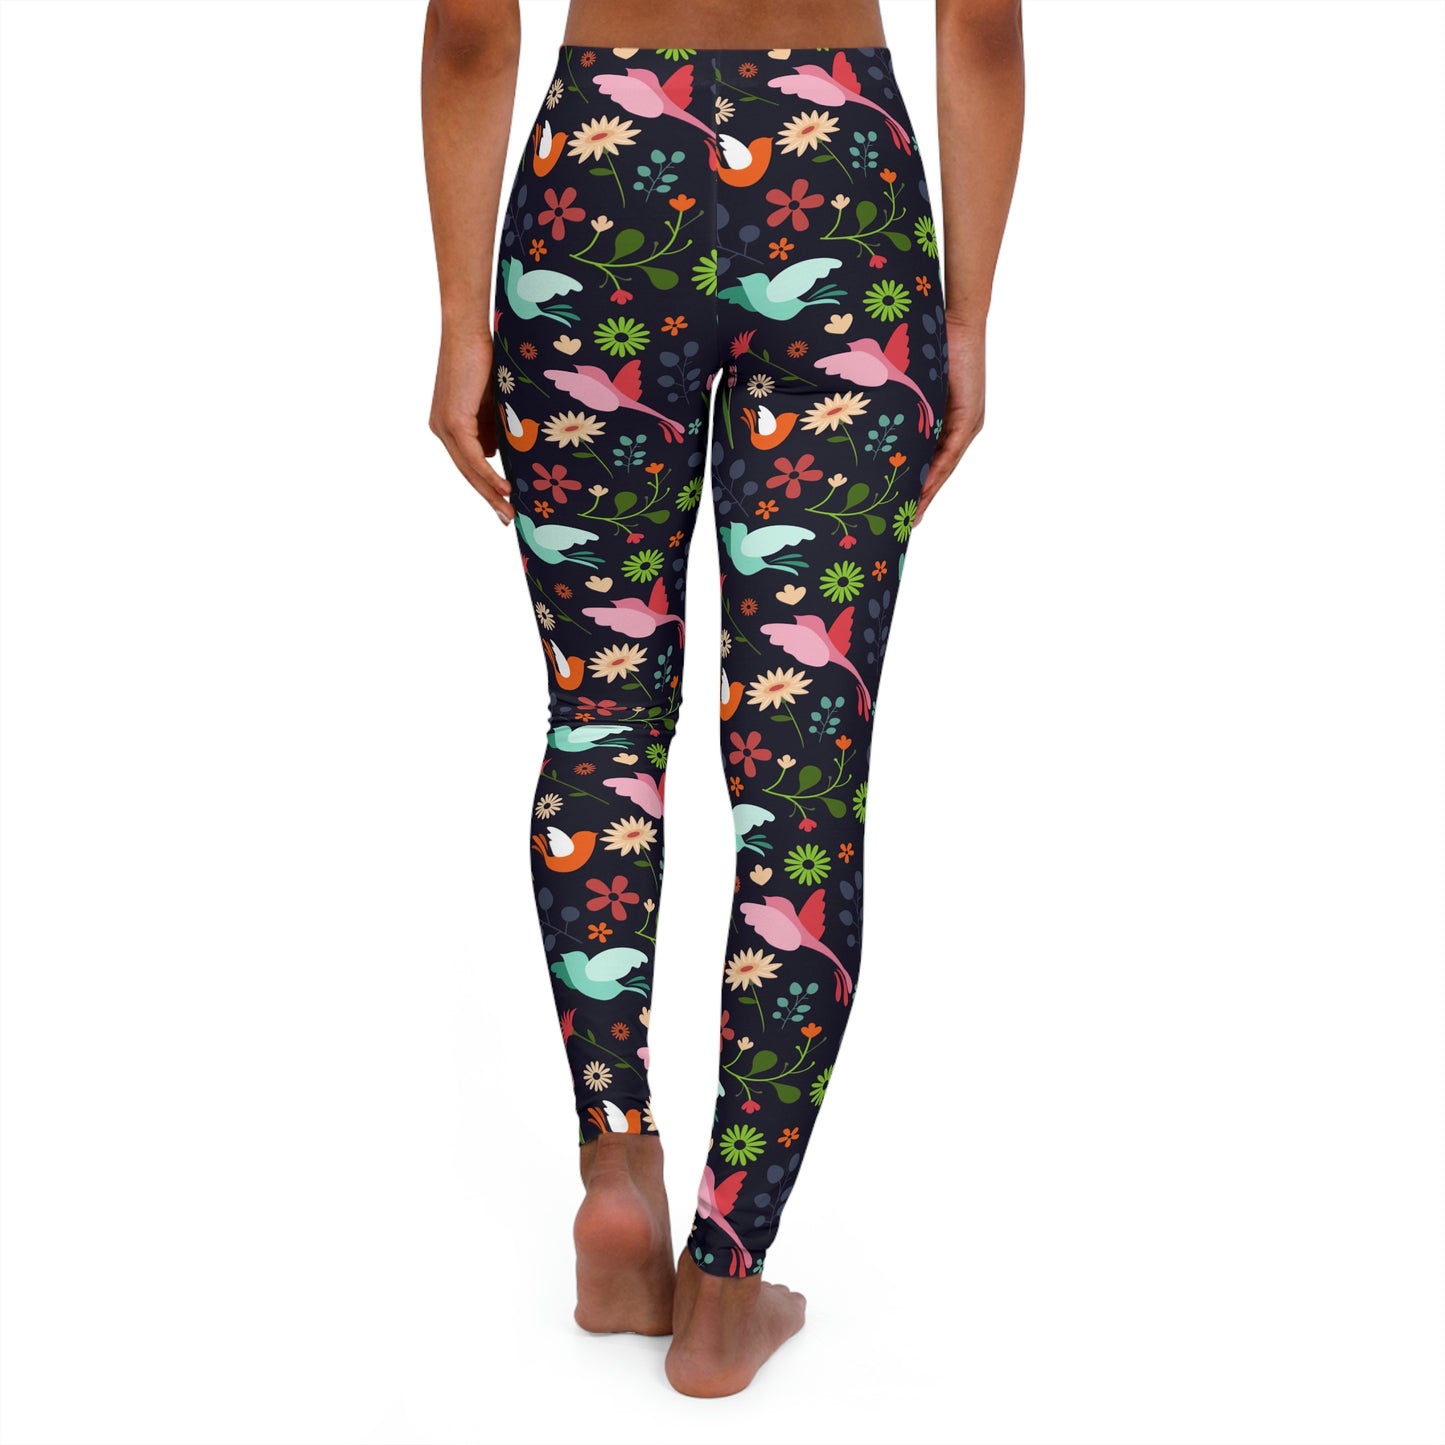 Hummingbird Safari Animal Kingdom  Women Leggings . One of a Kind Workout Activewear tights for Mothers Day, Girlfriend, Gift for Her